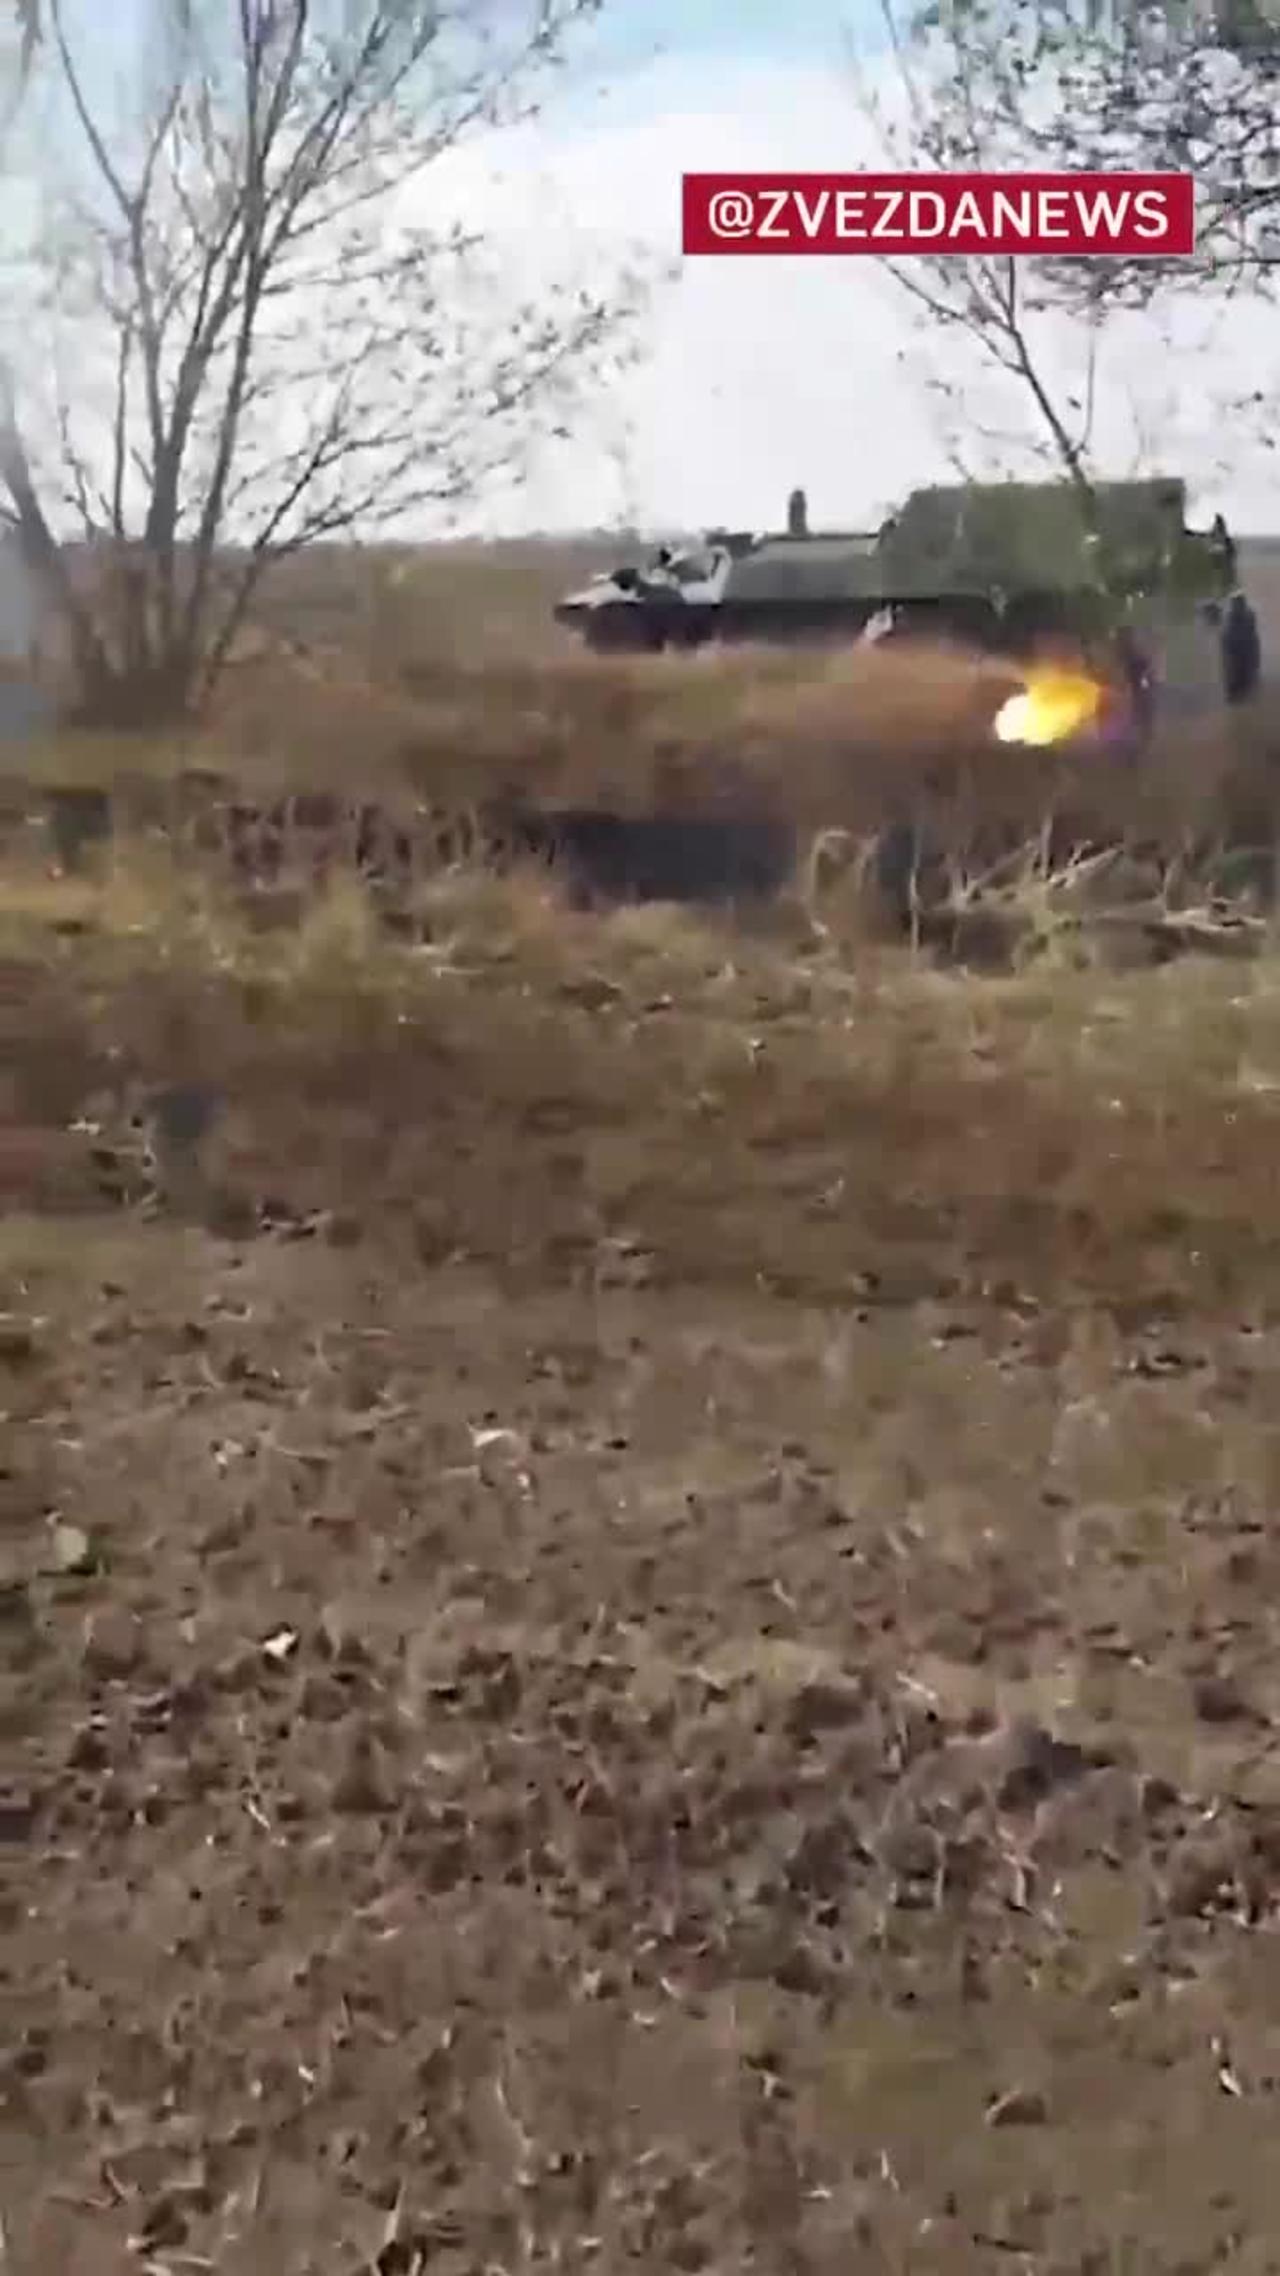 Mykola is loosing far too many tanks and dead Ukrainian soldiers in Cherson - strictly 18+